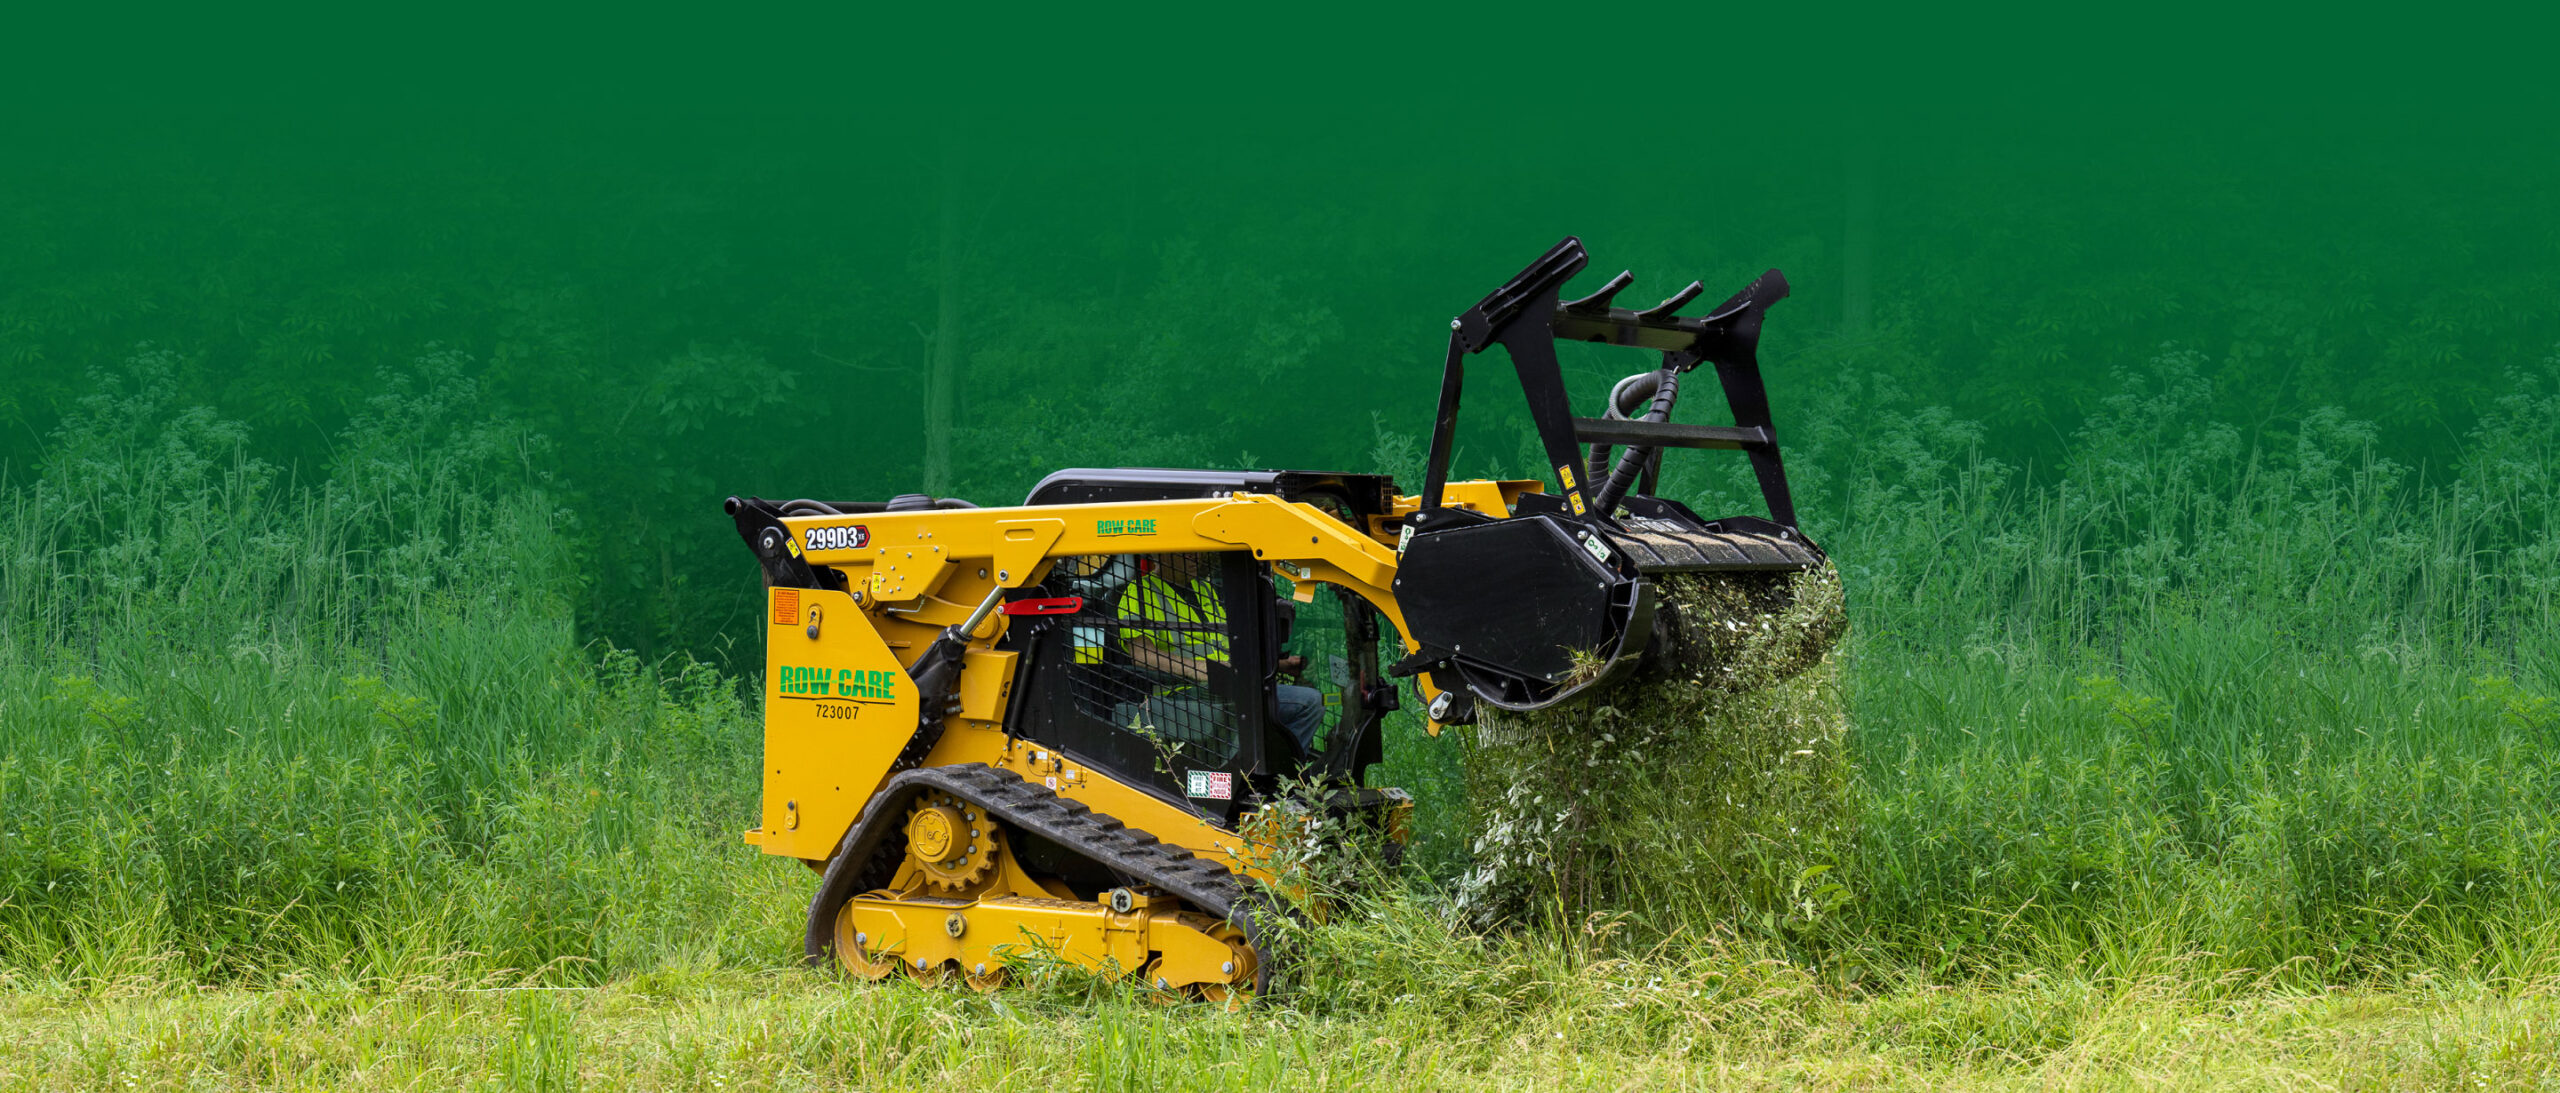 A branded yellow commercial skid steer with mulcher clears a path in a field with brush.